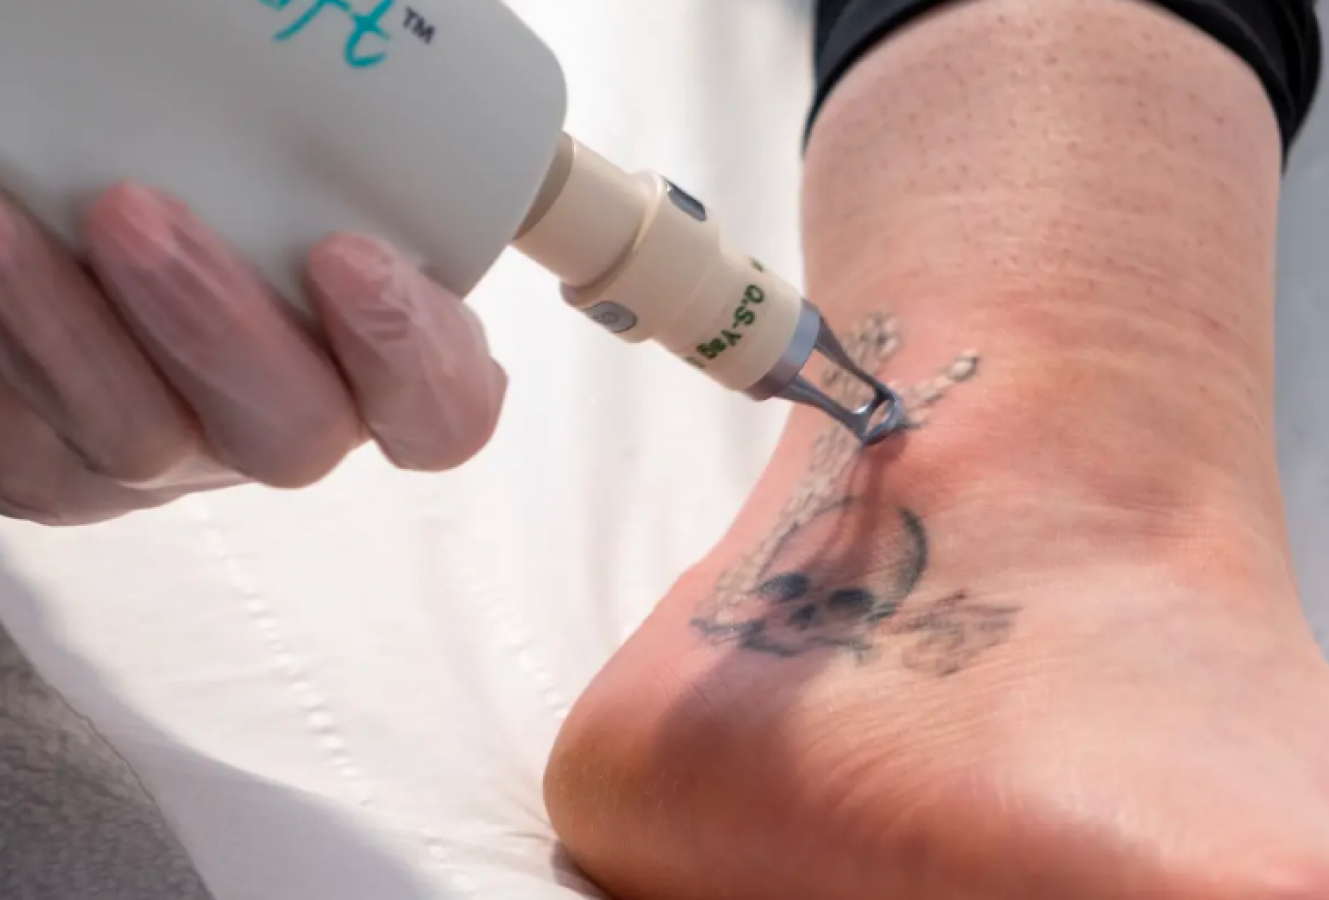 Laser Tattoo Removal: How long until you can see results? — LaserTat